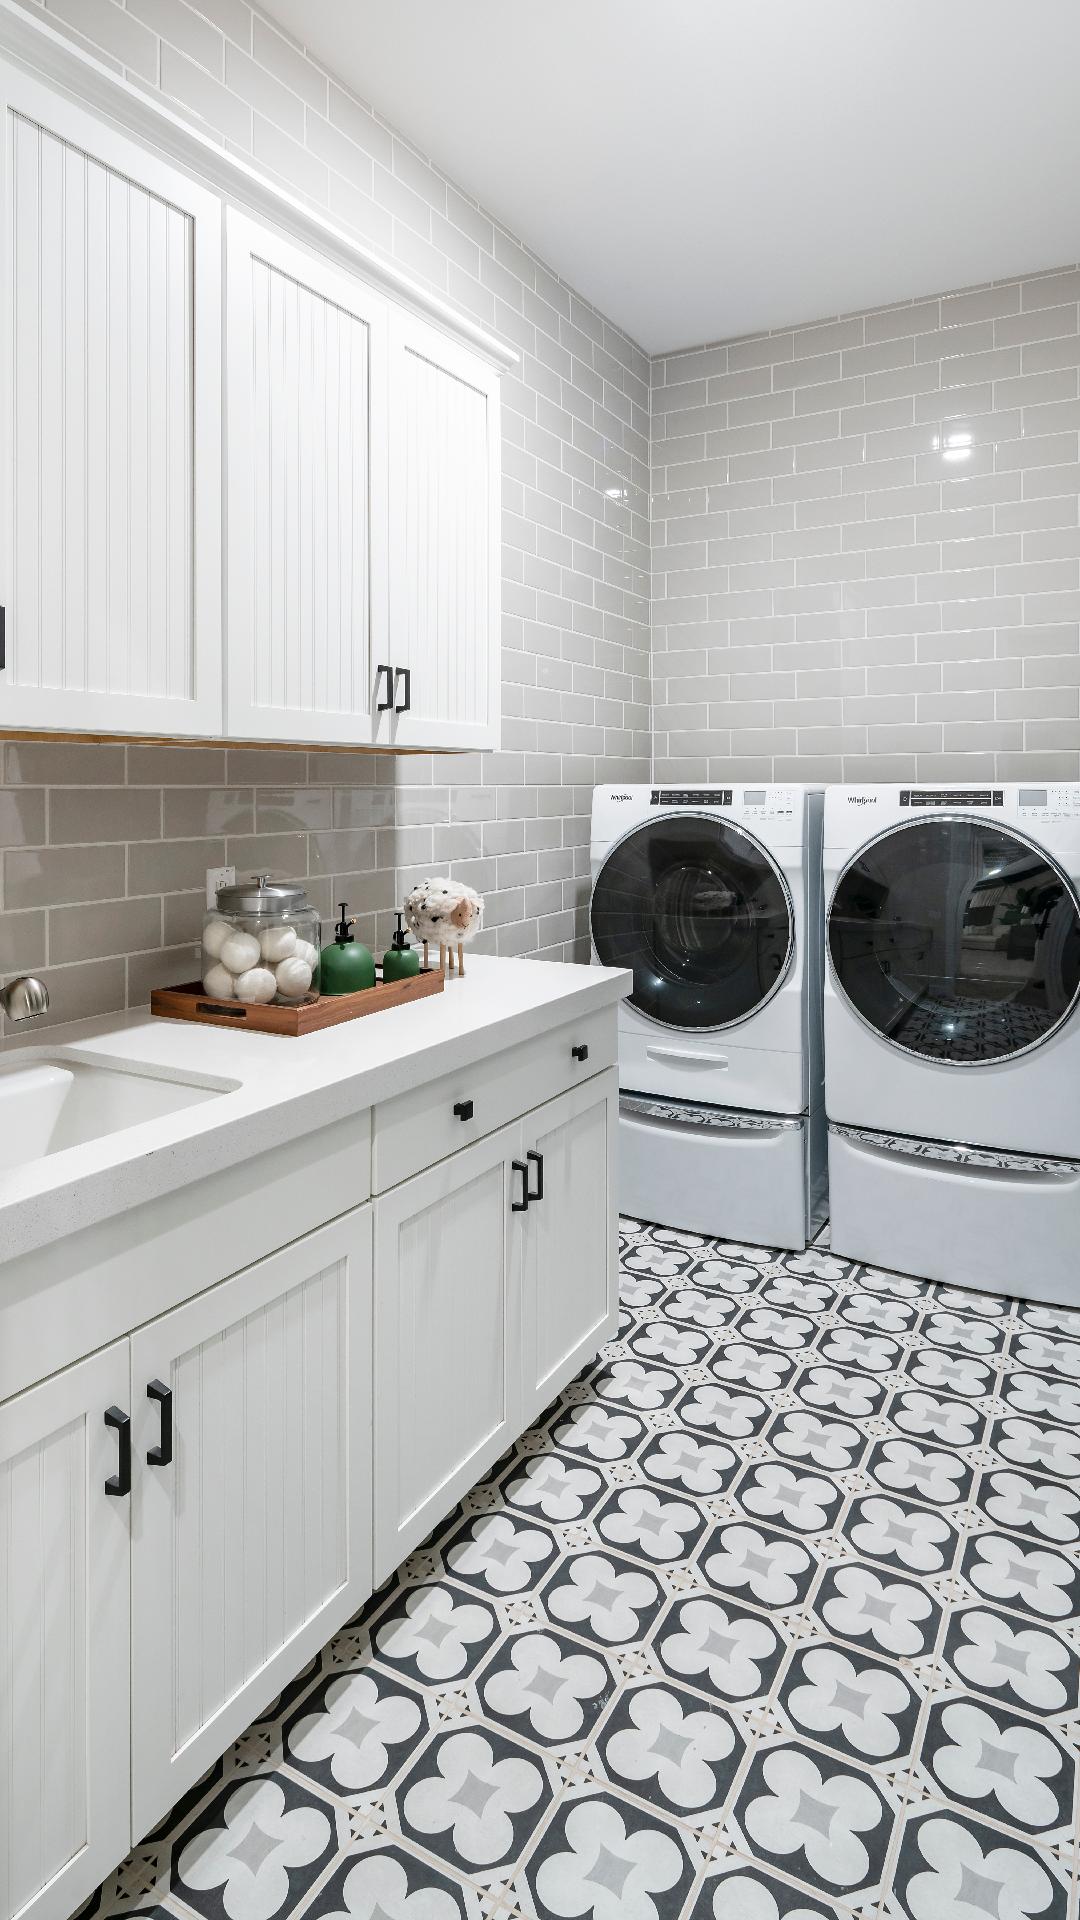 Laundry room with white cabinets, subway tile, quartz countertops and single basin sink